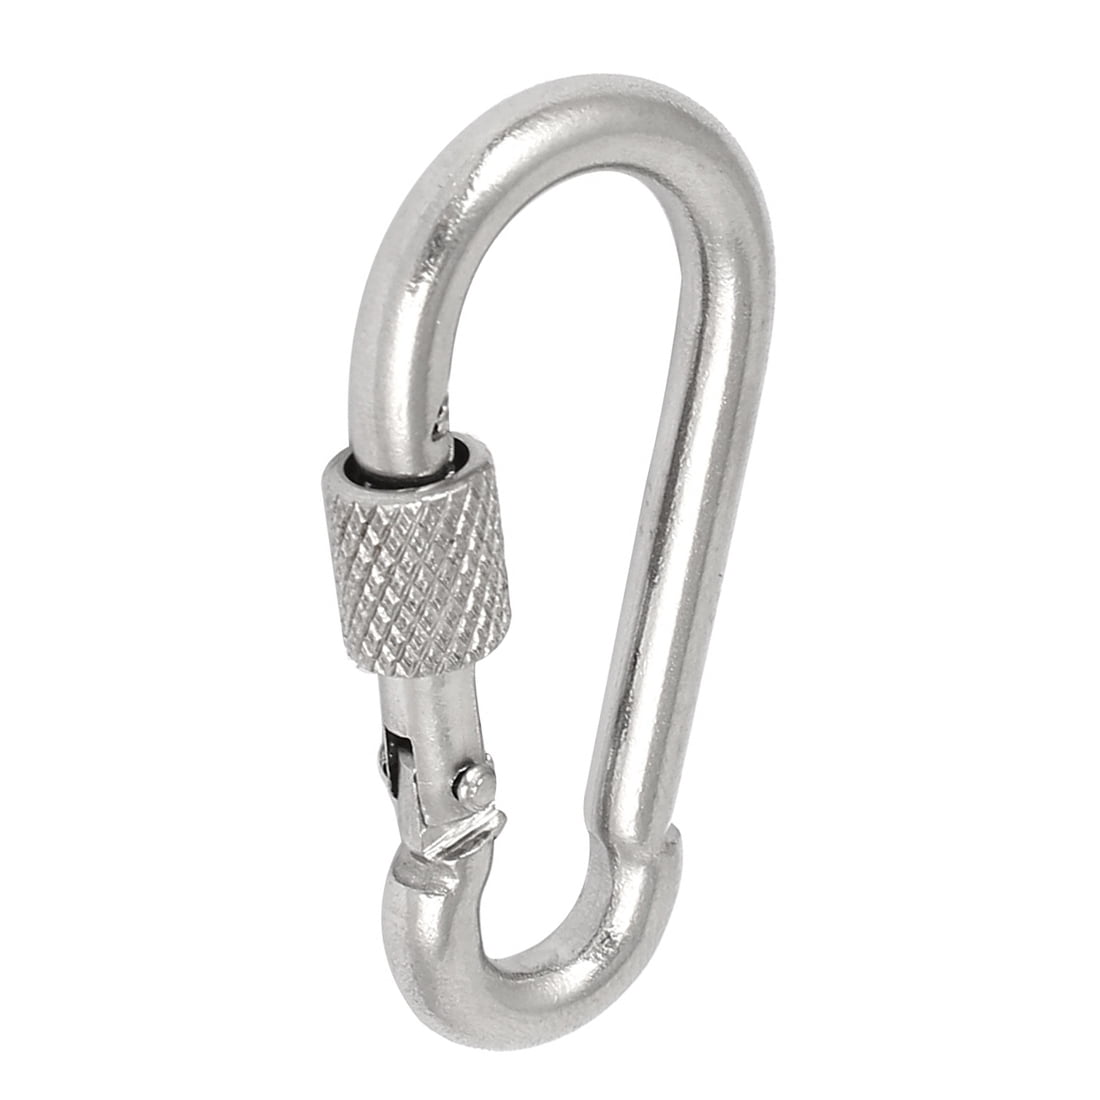 Perfect Tire & Disc Swings Holds up to 1000Lbs 1pcs,2pcs,4pcs Moonight Stainless Steel 304 Spring Snap Hook Carabiner Screw Lock 